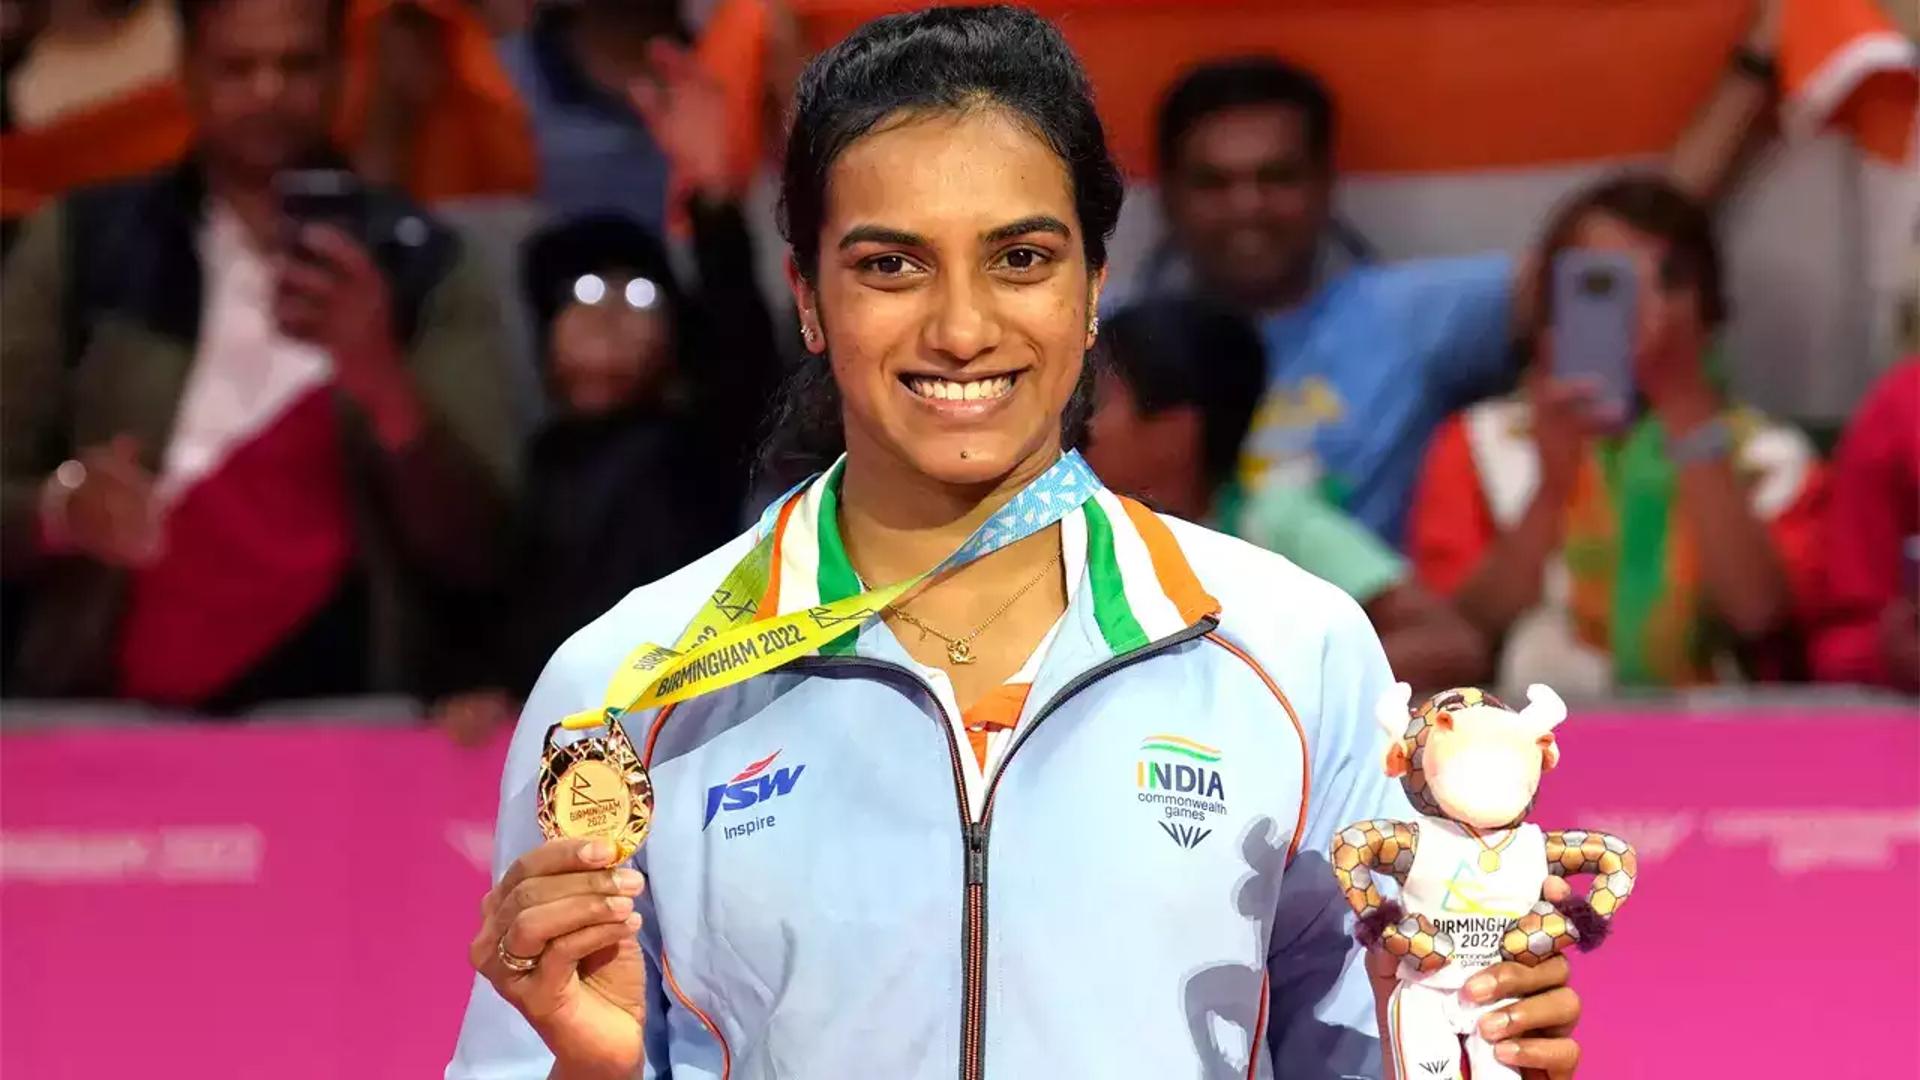 PV Sindhu at the Commonwealth Games 2022 (Image Credits - Birmingham 2022)